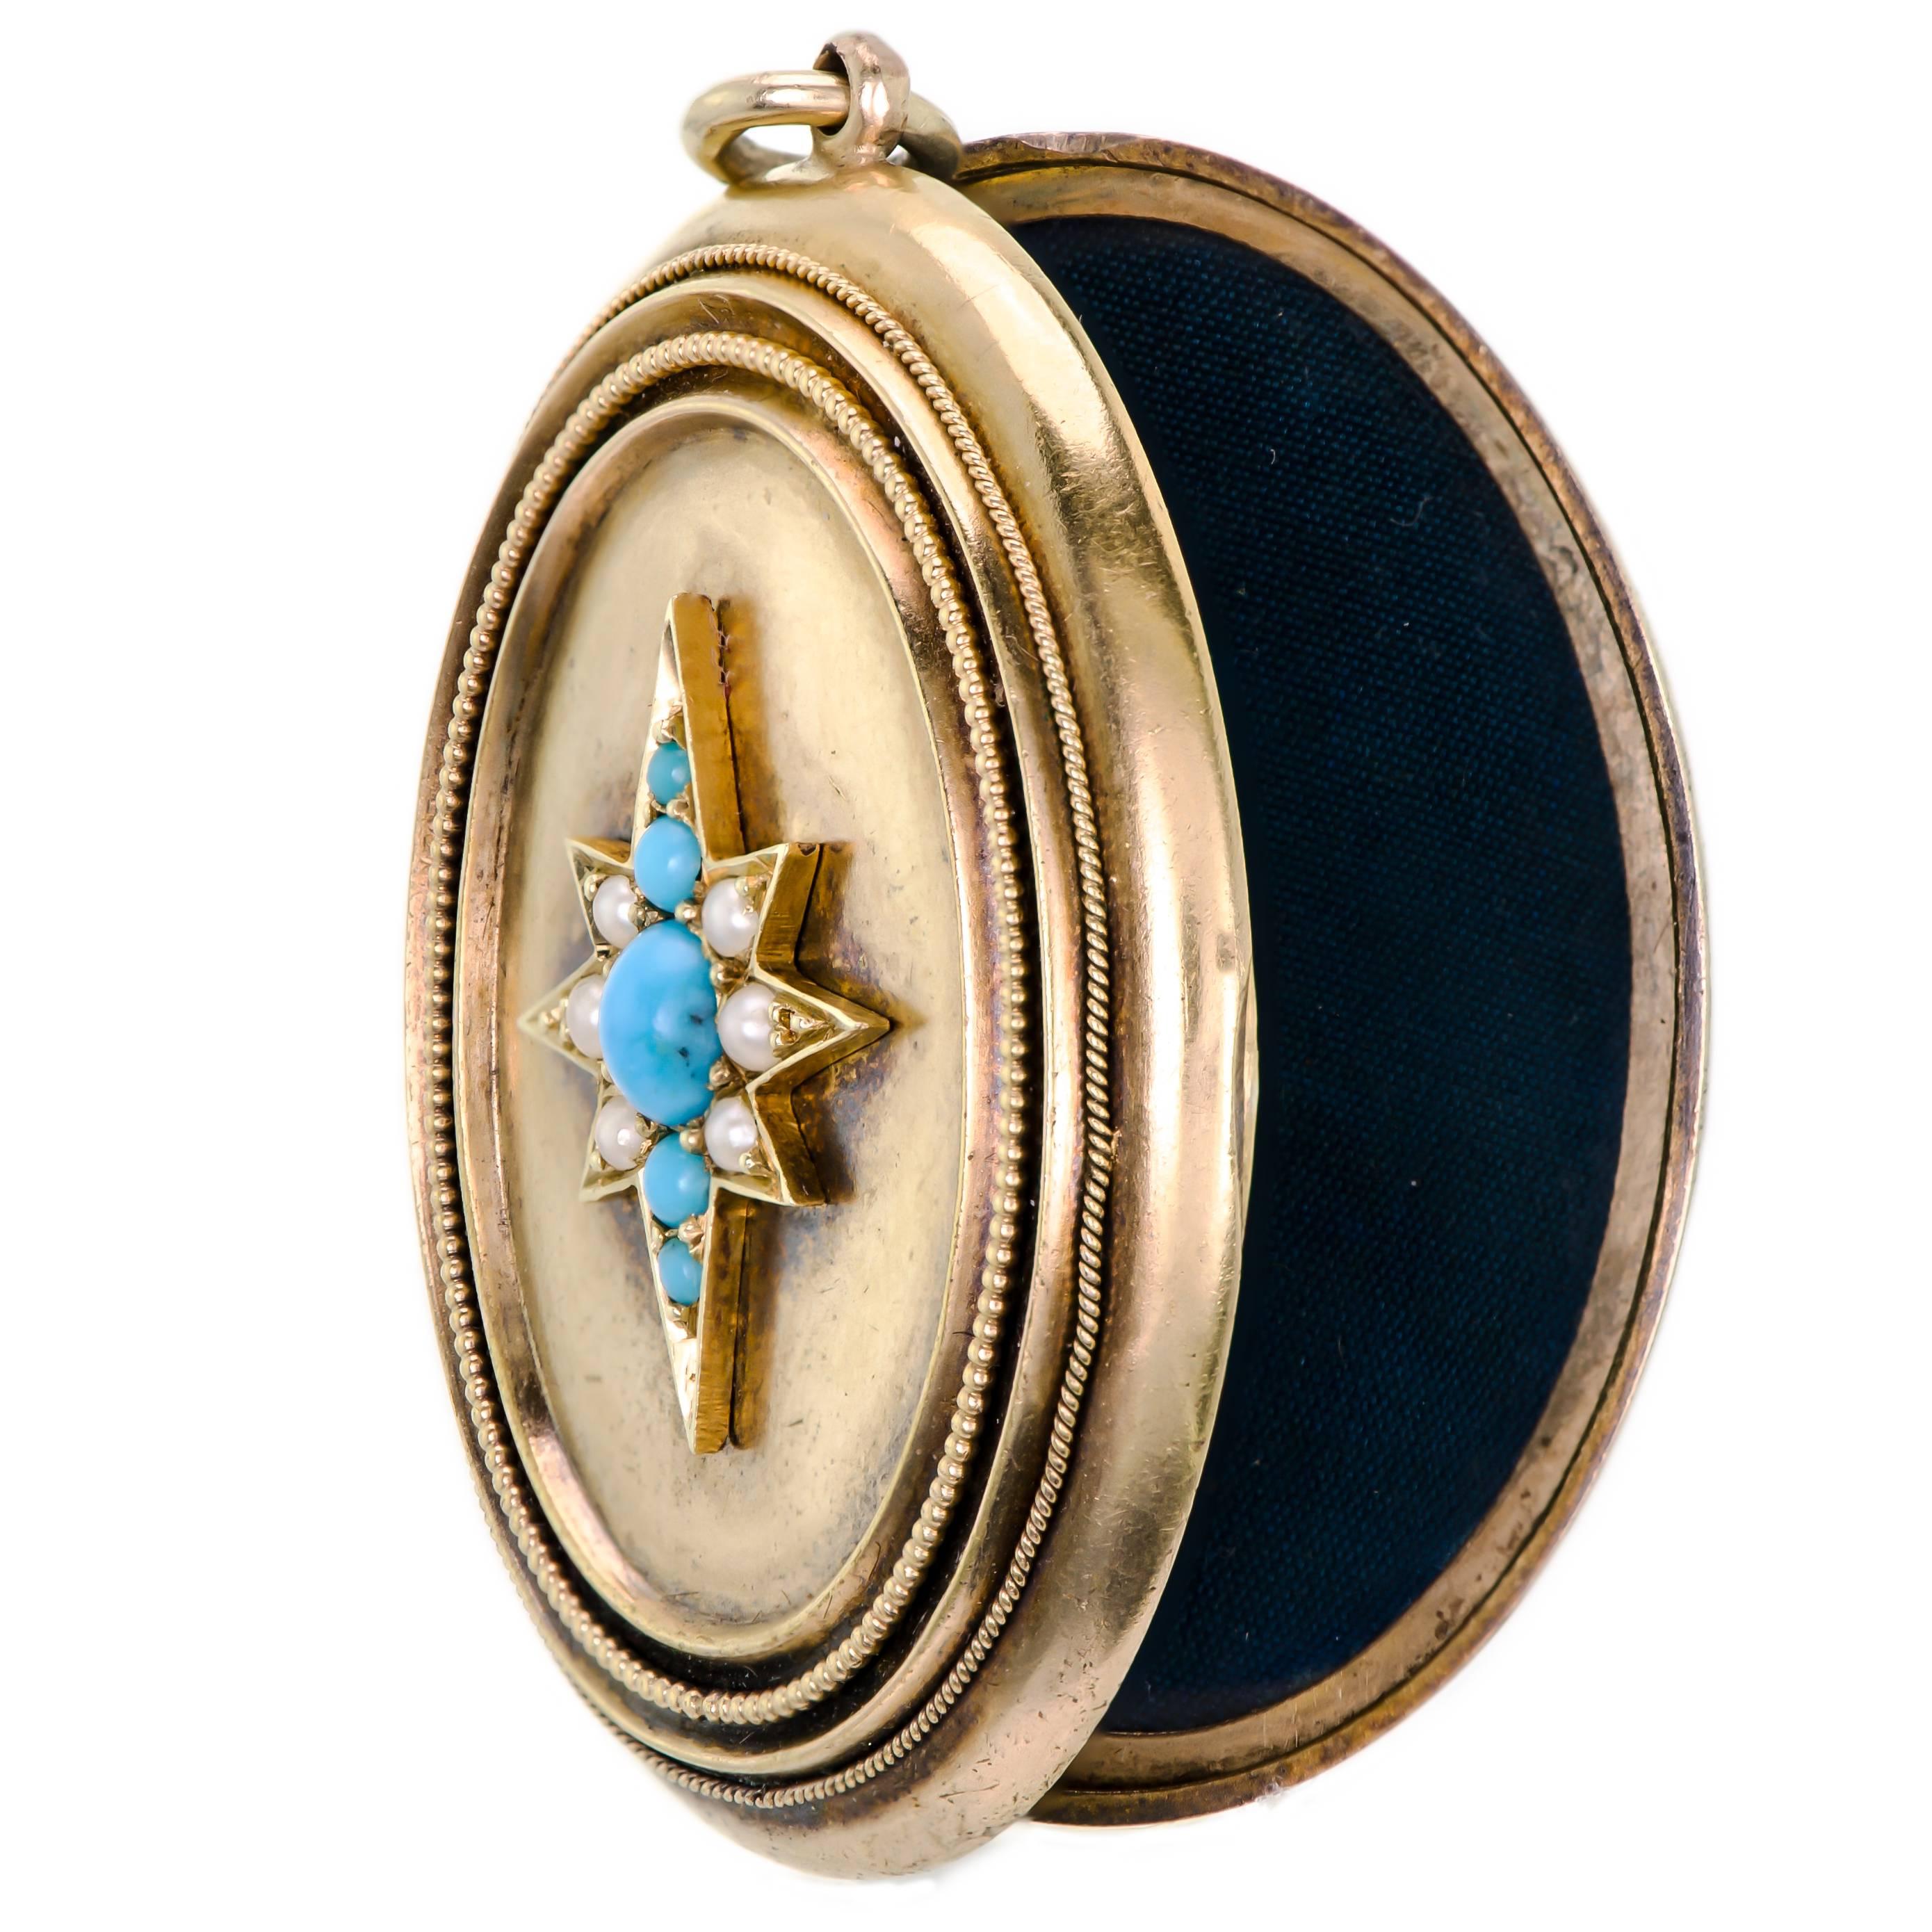 Lovely Circa 1890 Victorian 14K yellow gold turquoise and pearl locket - glass frames on both sides inside.  Applied turquoise pearl stylized star